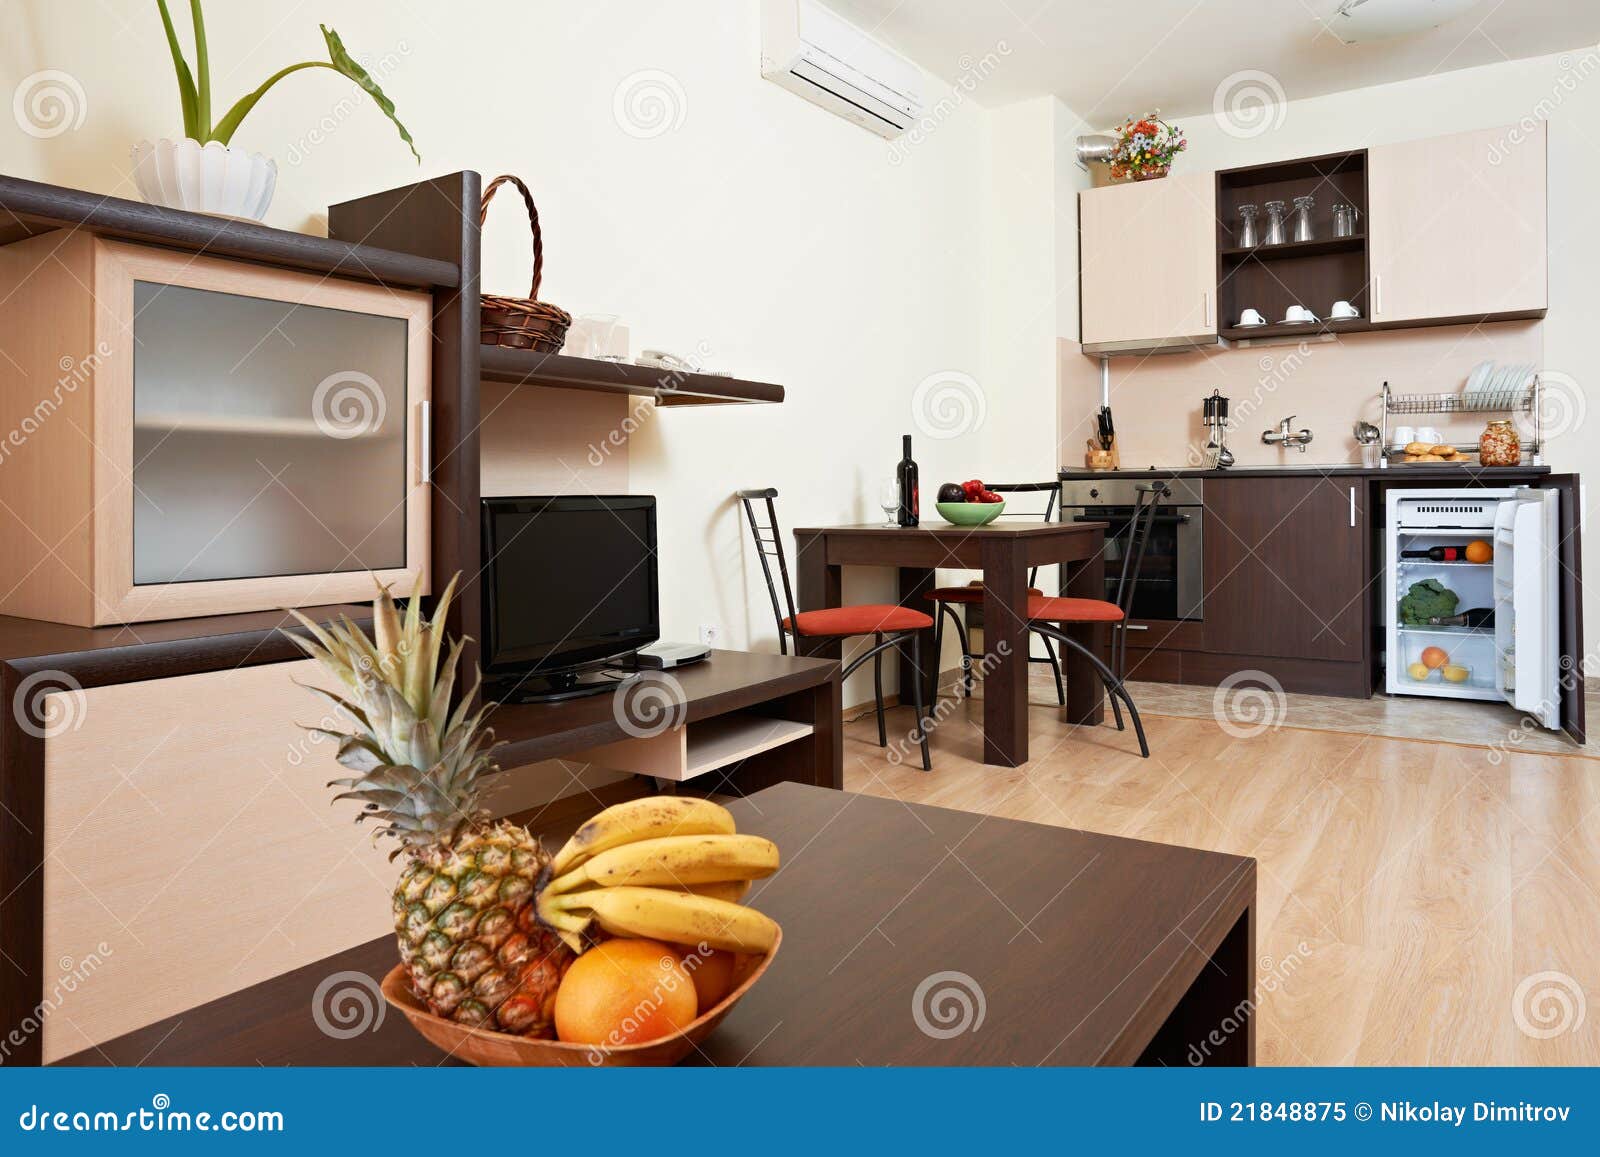 Living Room With Kitchen Interior Stock Image - Image of spacious